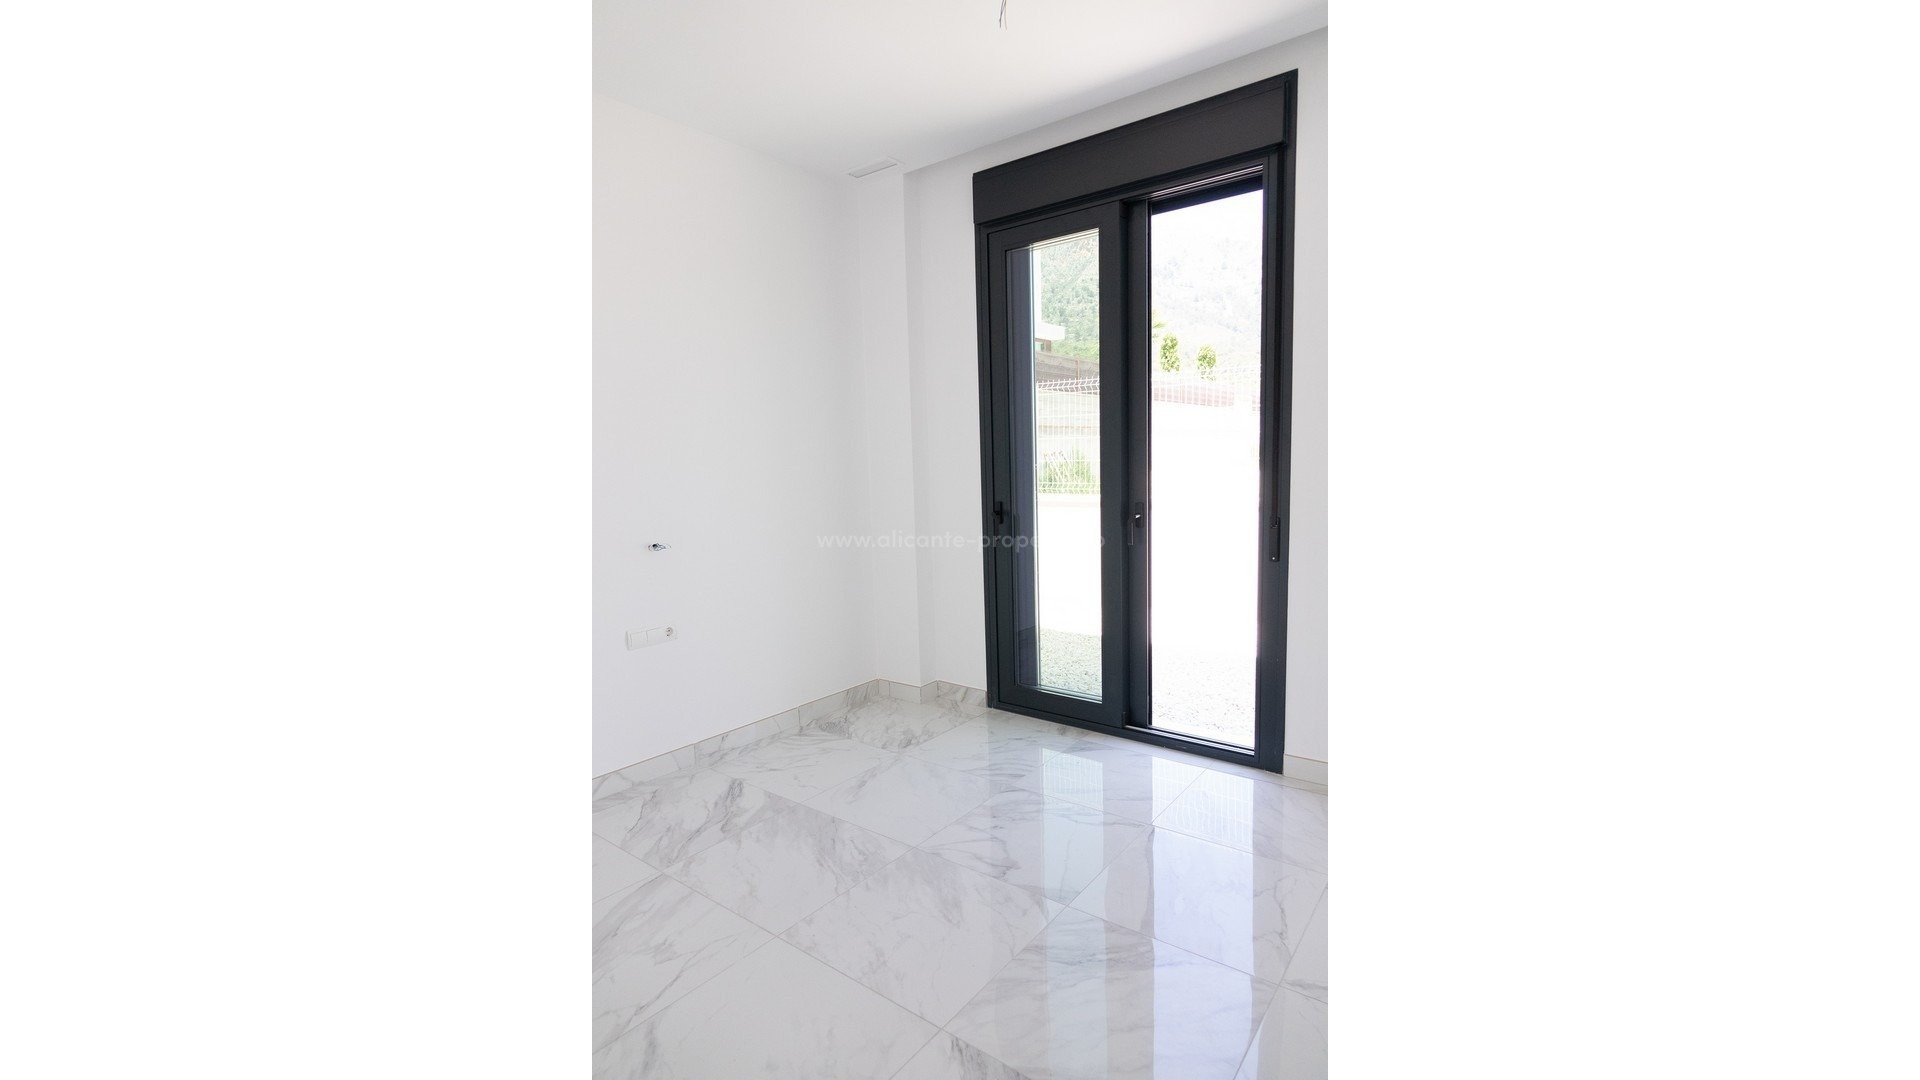 Brand new house in Polop, one floor, 3 bedrooms, 2 bathrooms and large terrace, garden w/pool and solarium, minimum plot of 400 m2, parking space